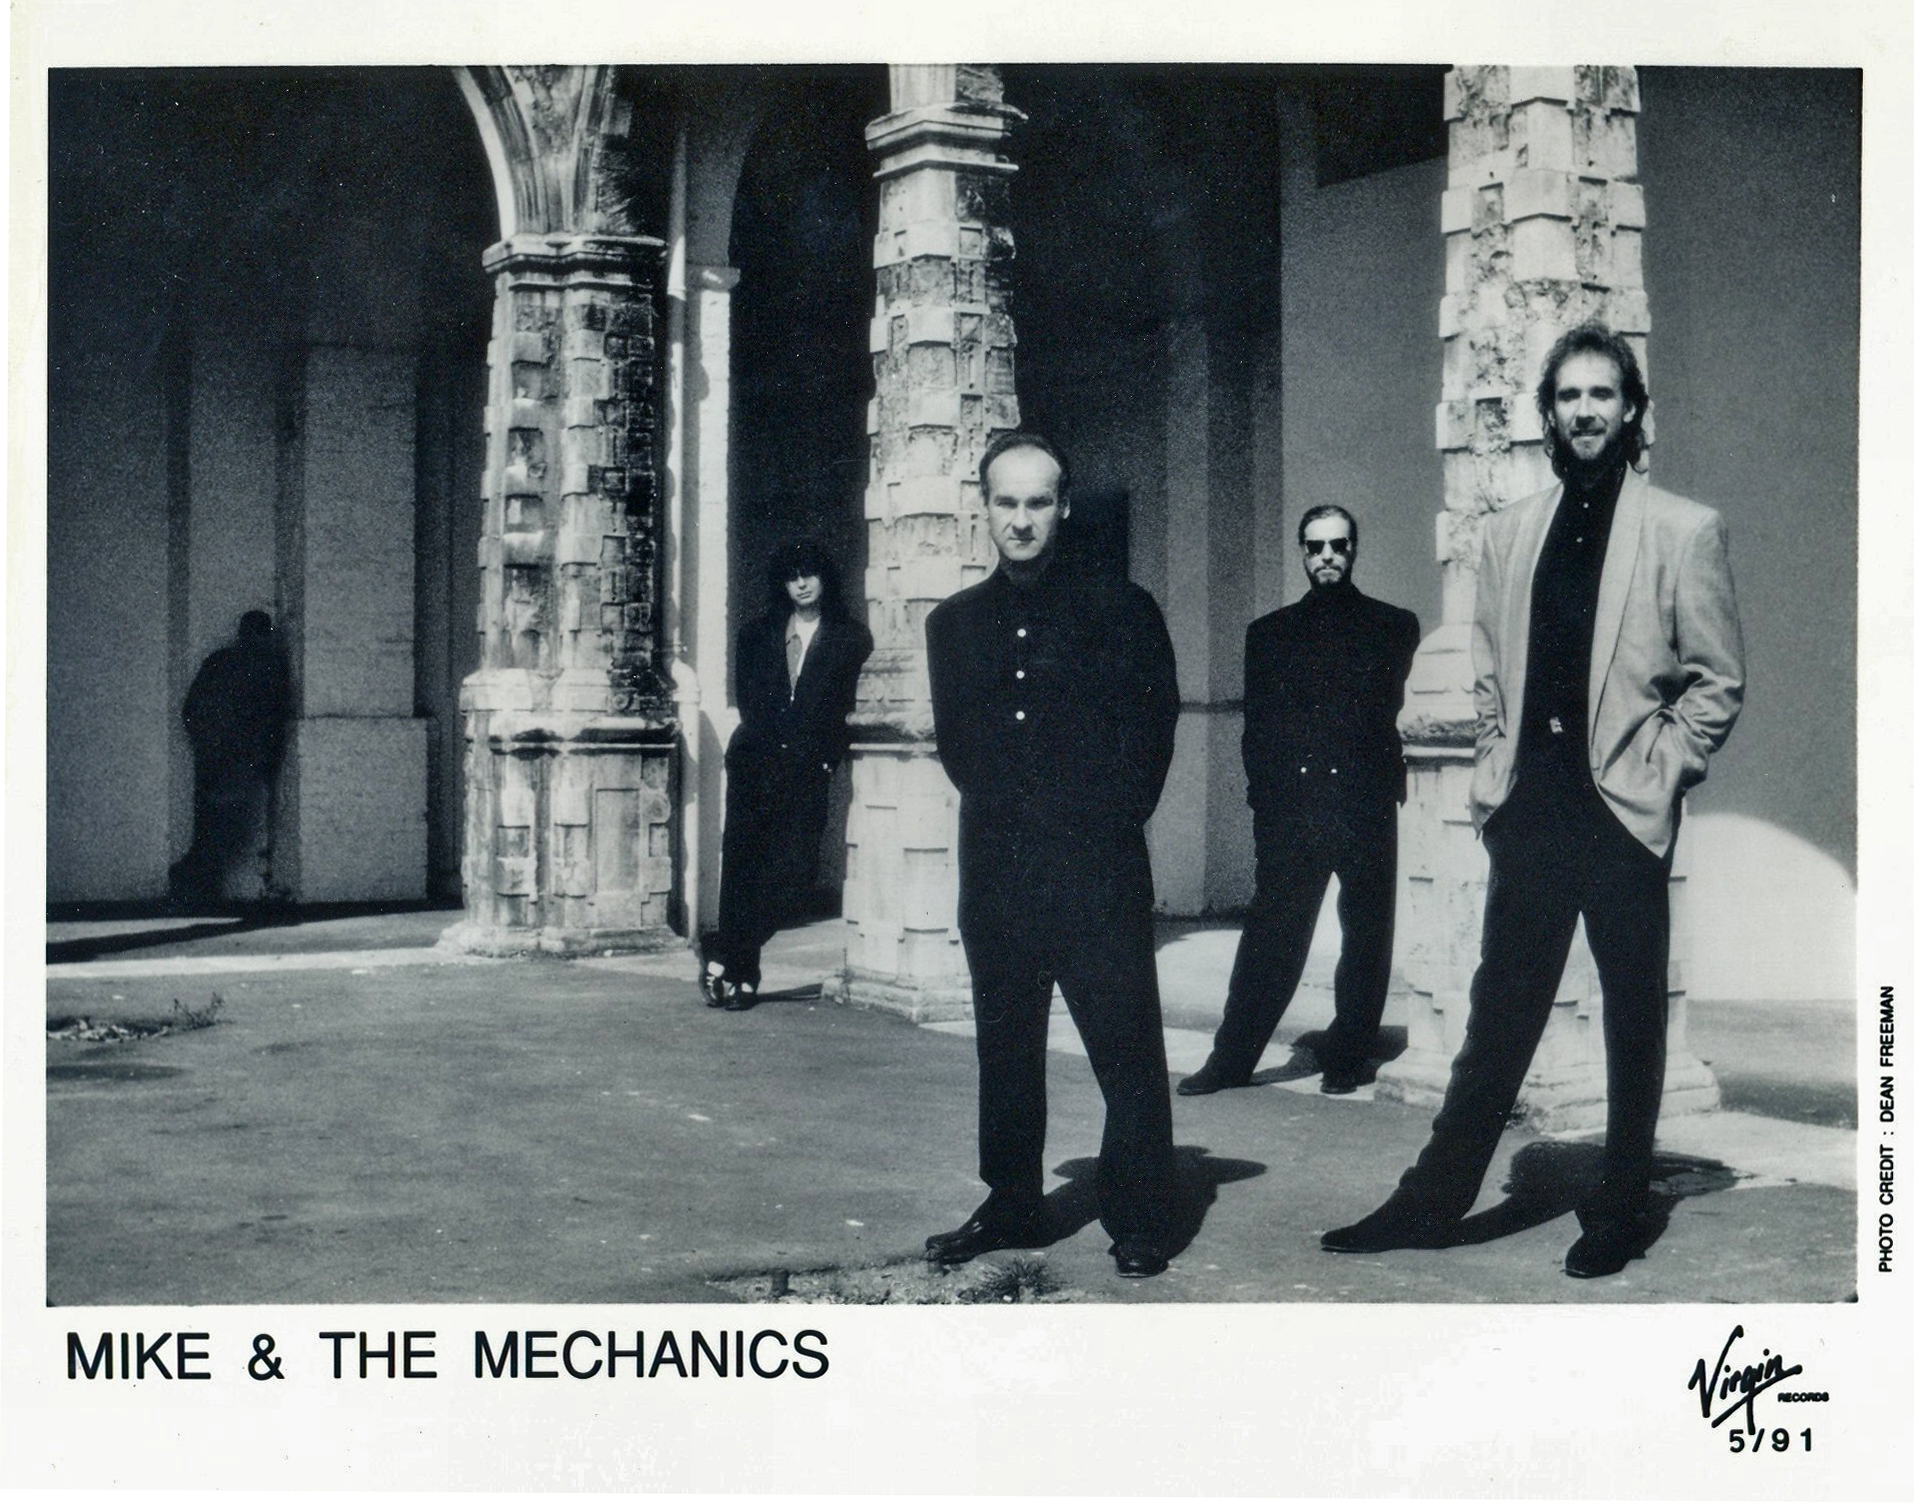 Mike The Mechanics Albums: songs, discography, biography